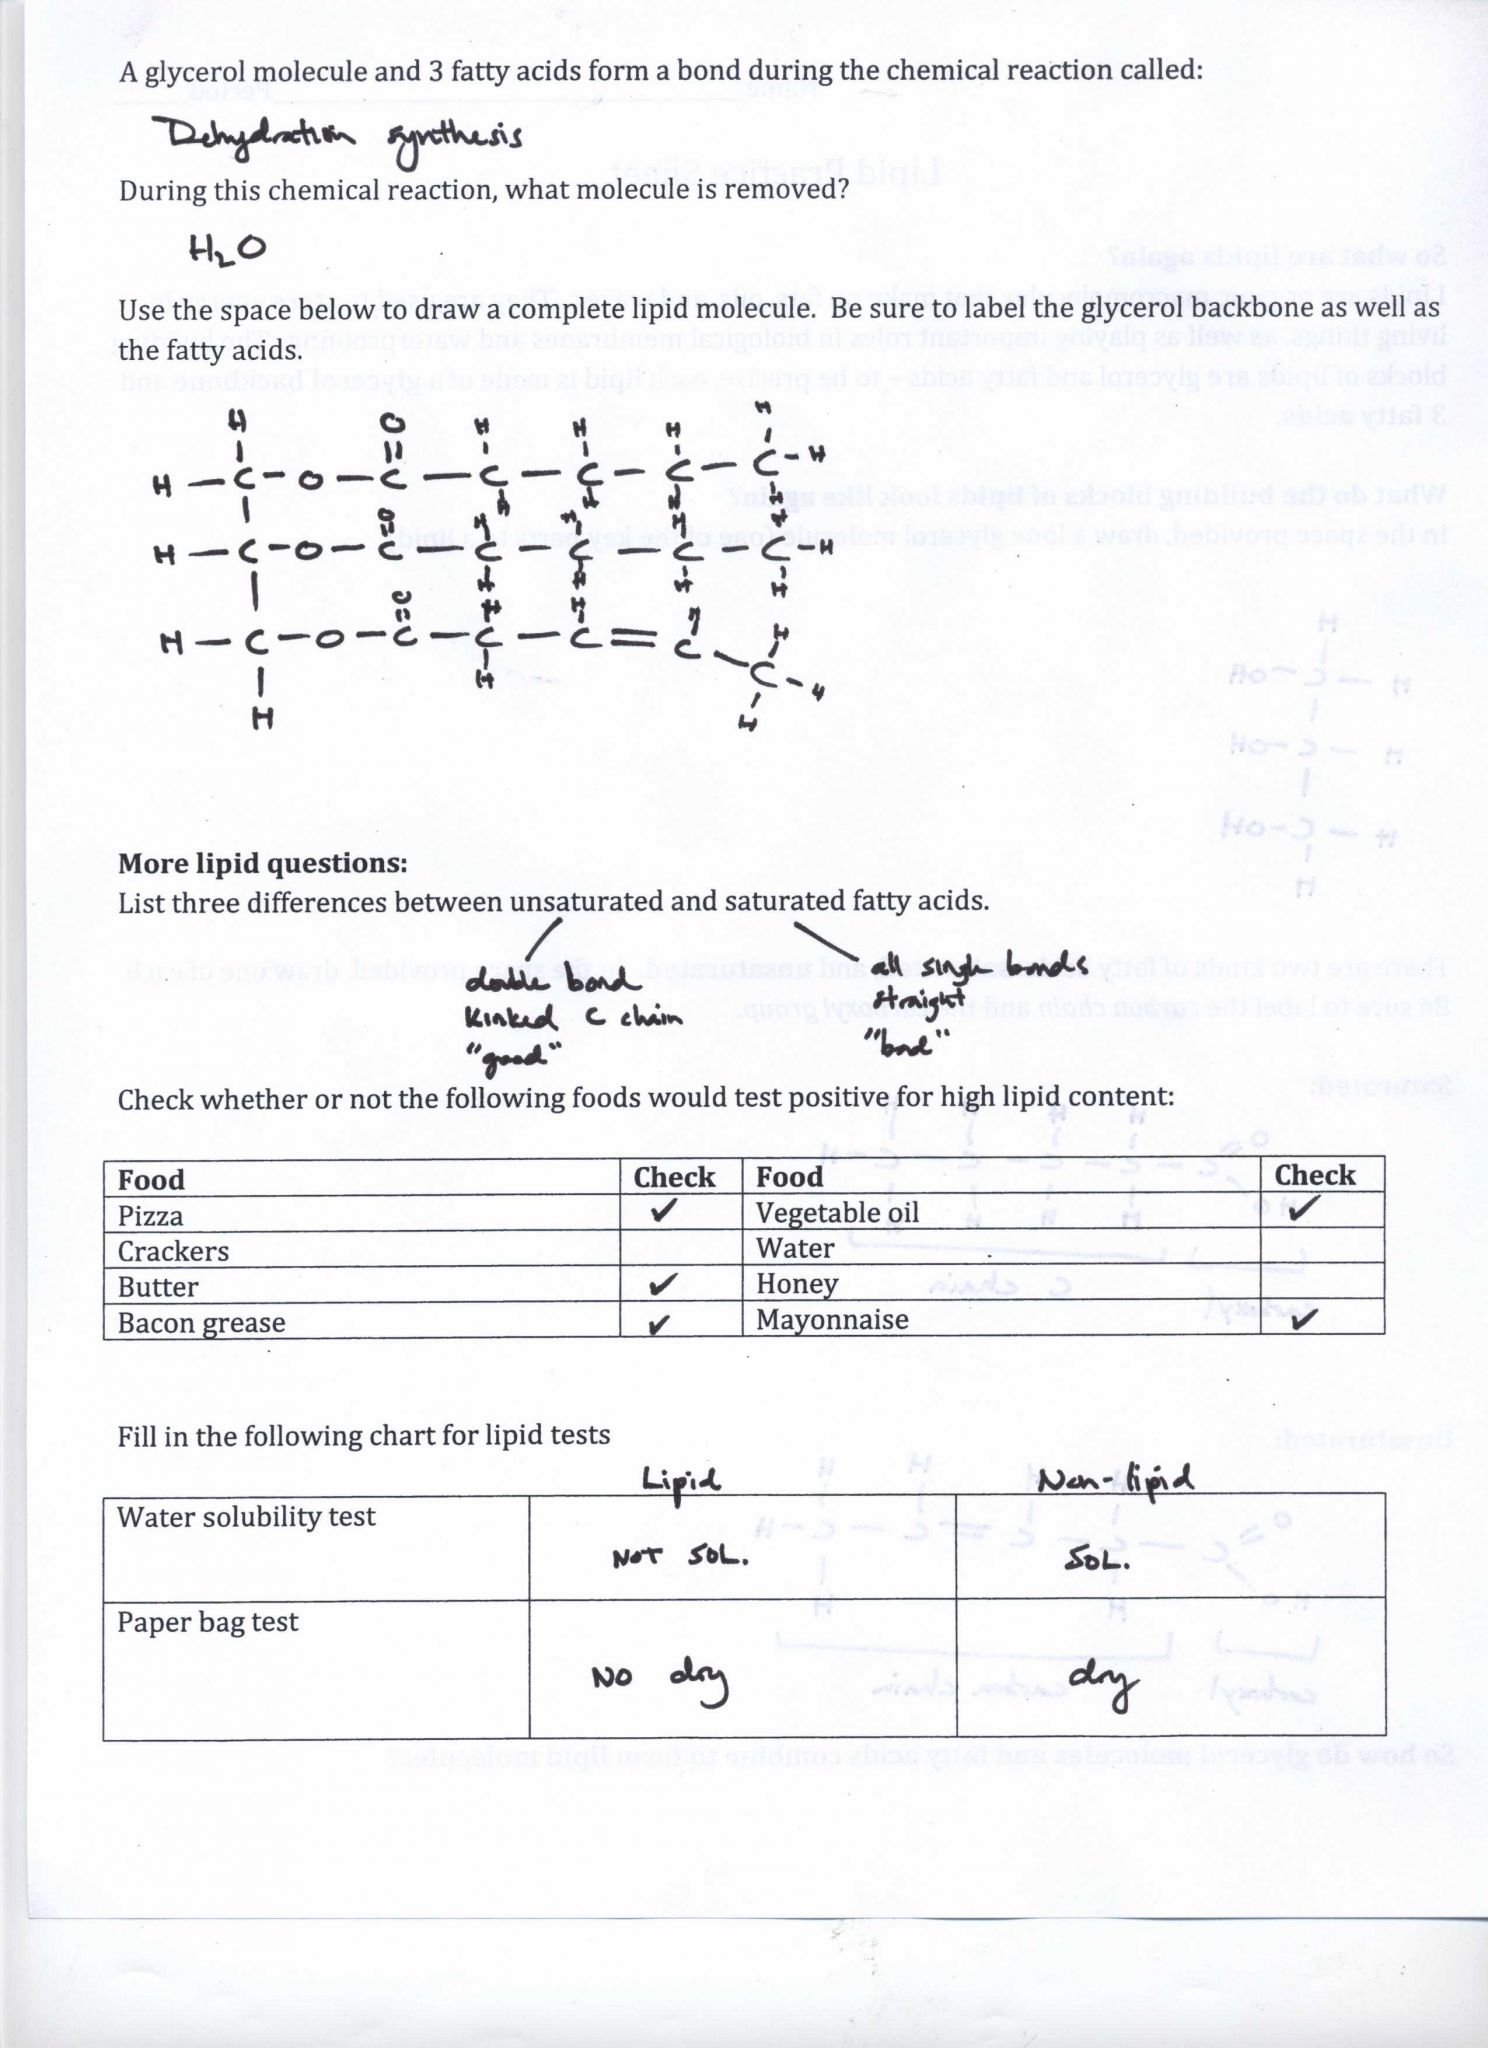 Chemistry Nomenclature Worksheet Answers as Well as 50 Elegant Image isotopes Ions and atoms Worksheet Answers